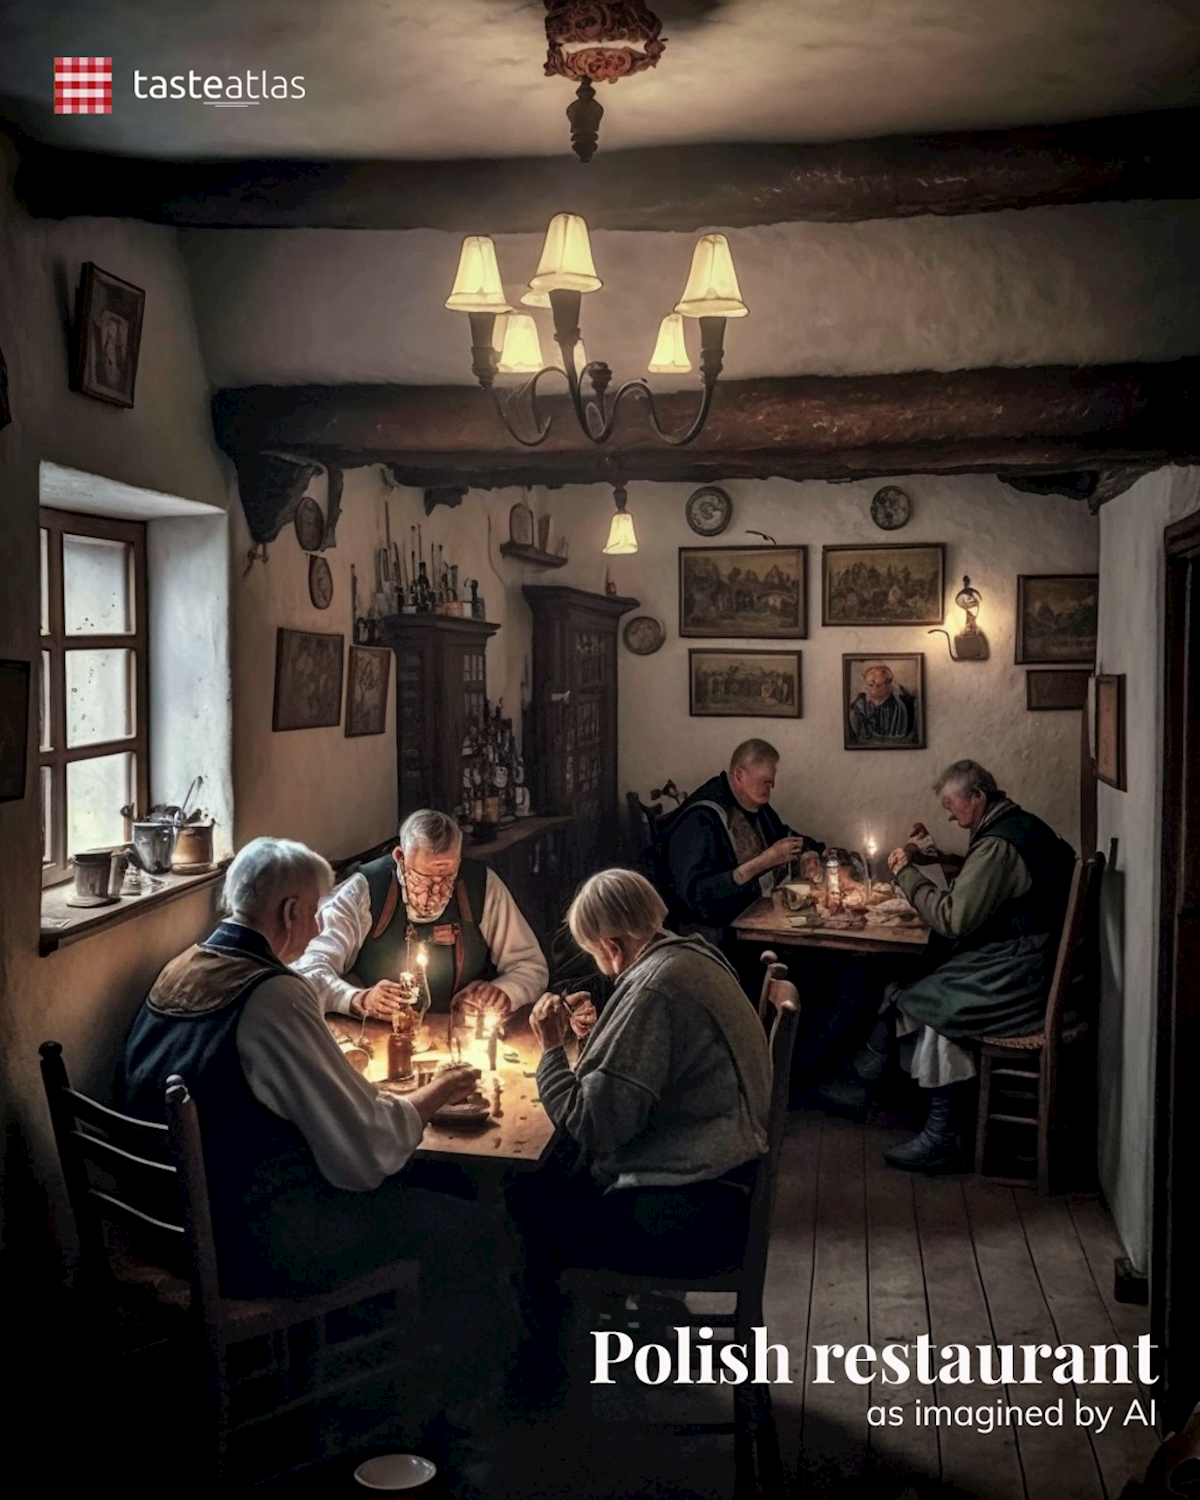 Prompt: Imagine locals eating in a traditional Polish restaurant